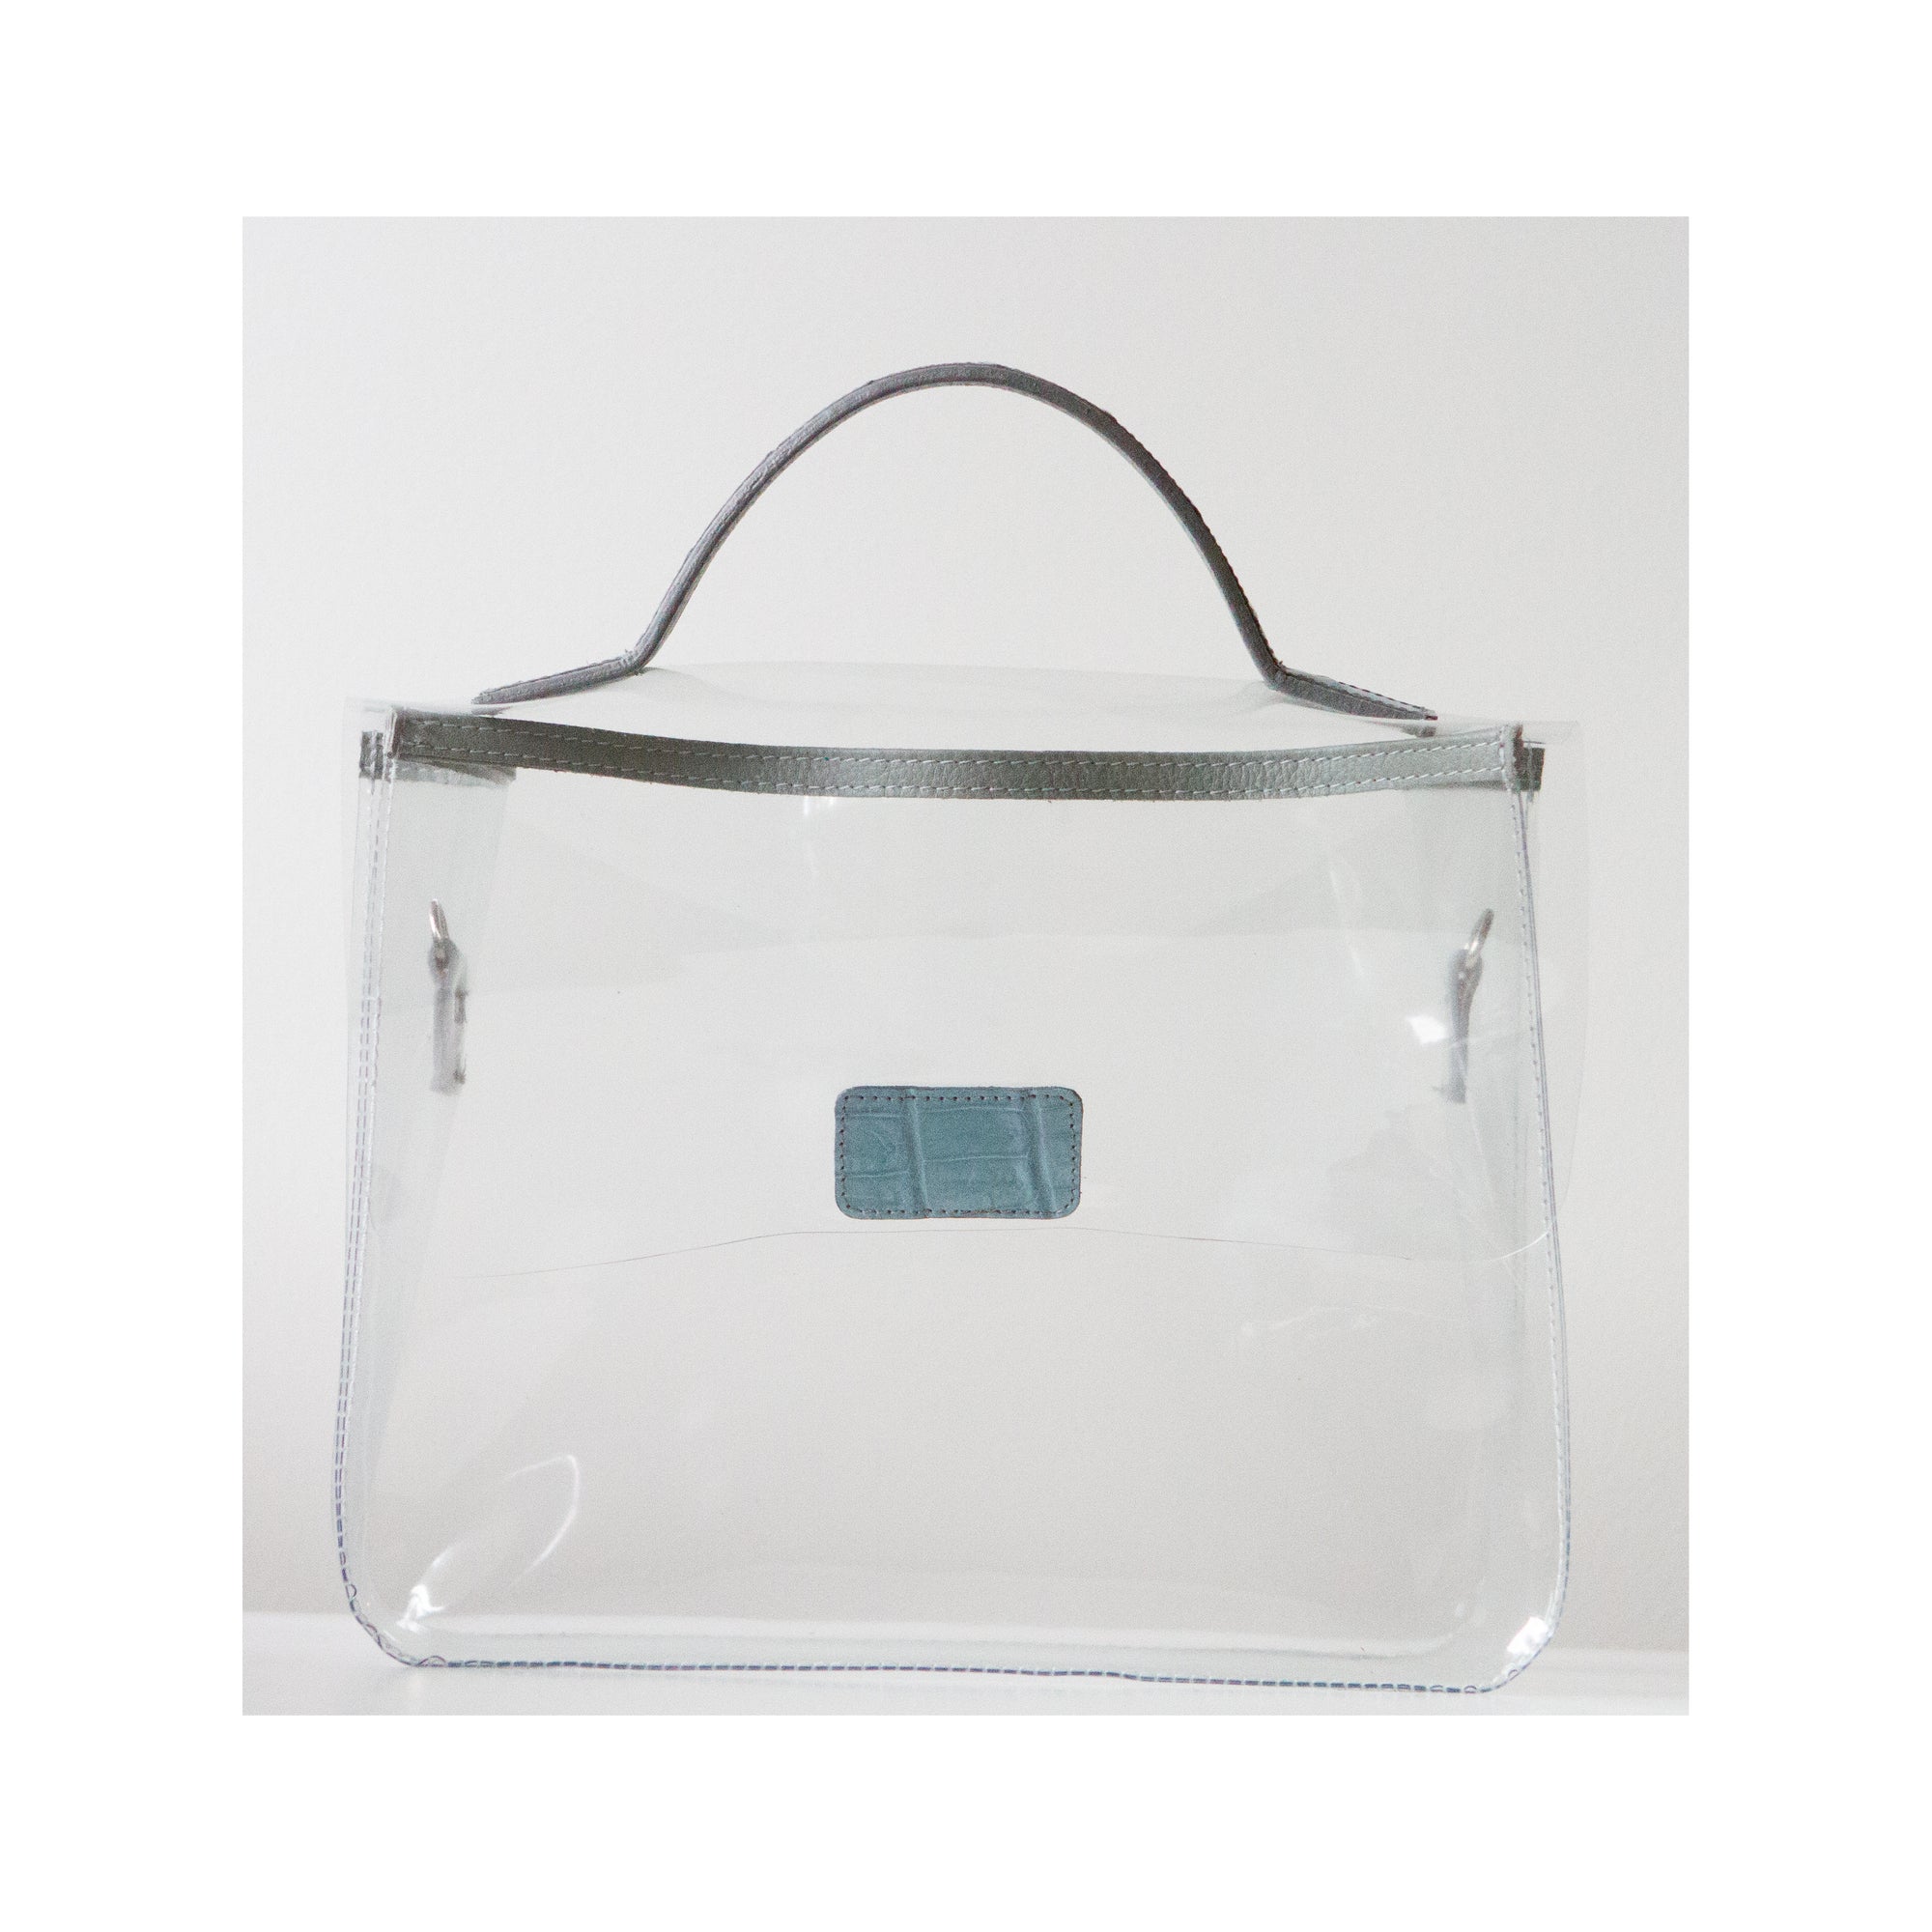 LIN8 clear, see through, pvc, plastic bag to protect your luxury leather bag, handbag, purse, clutch from wet weather, rain